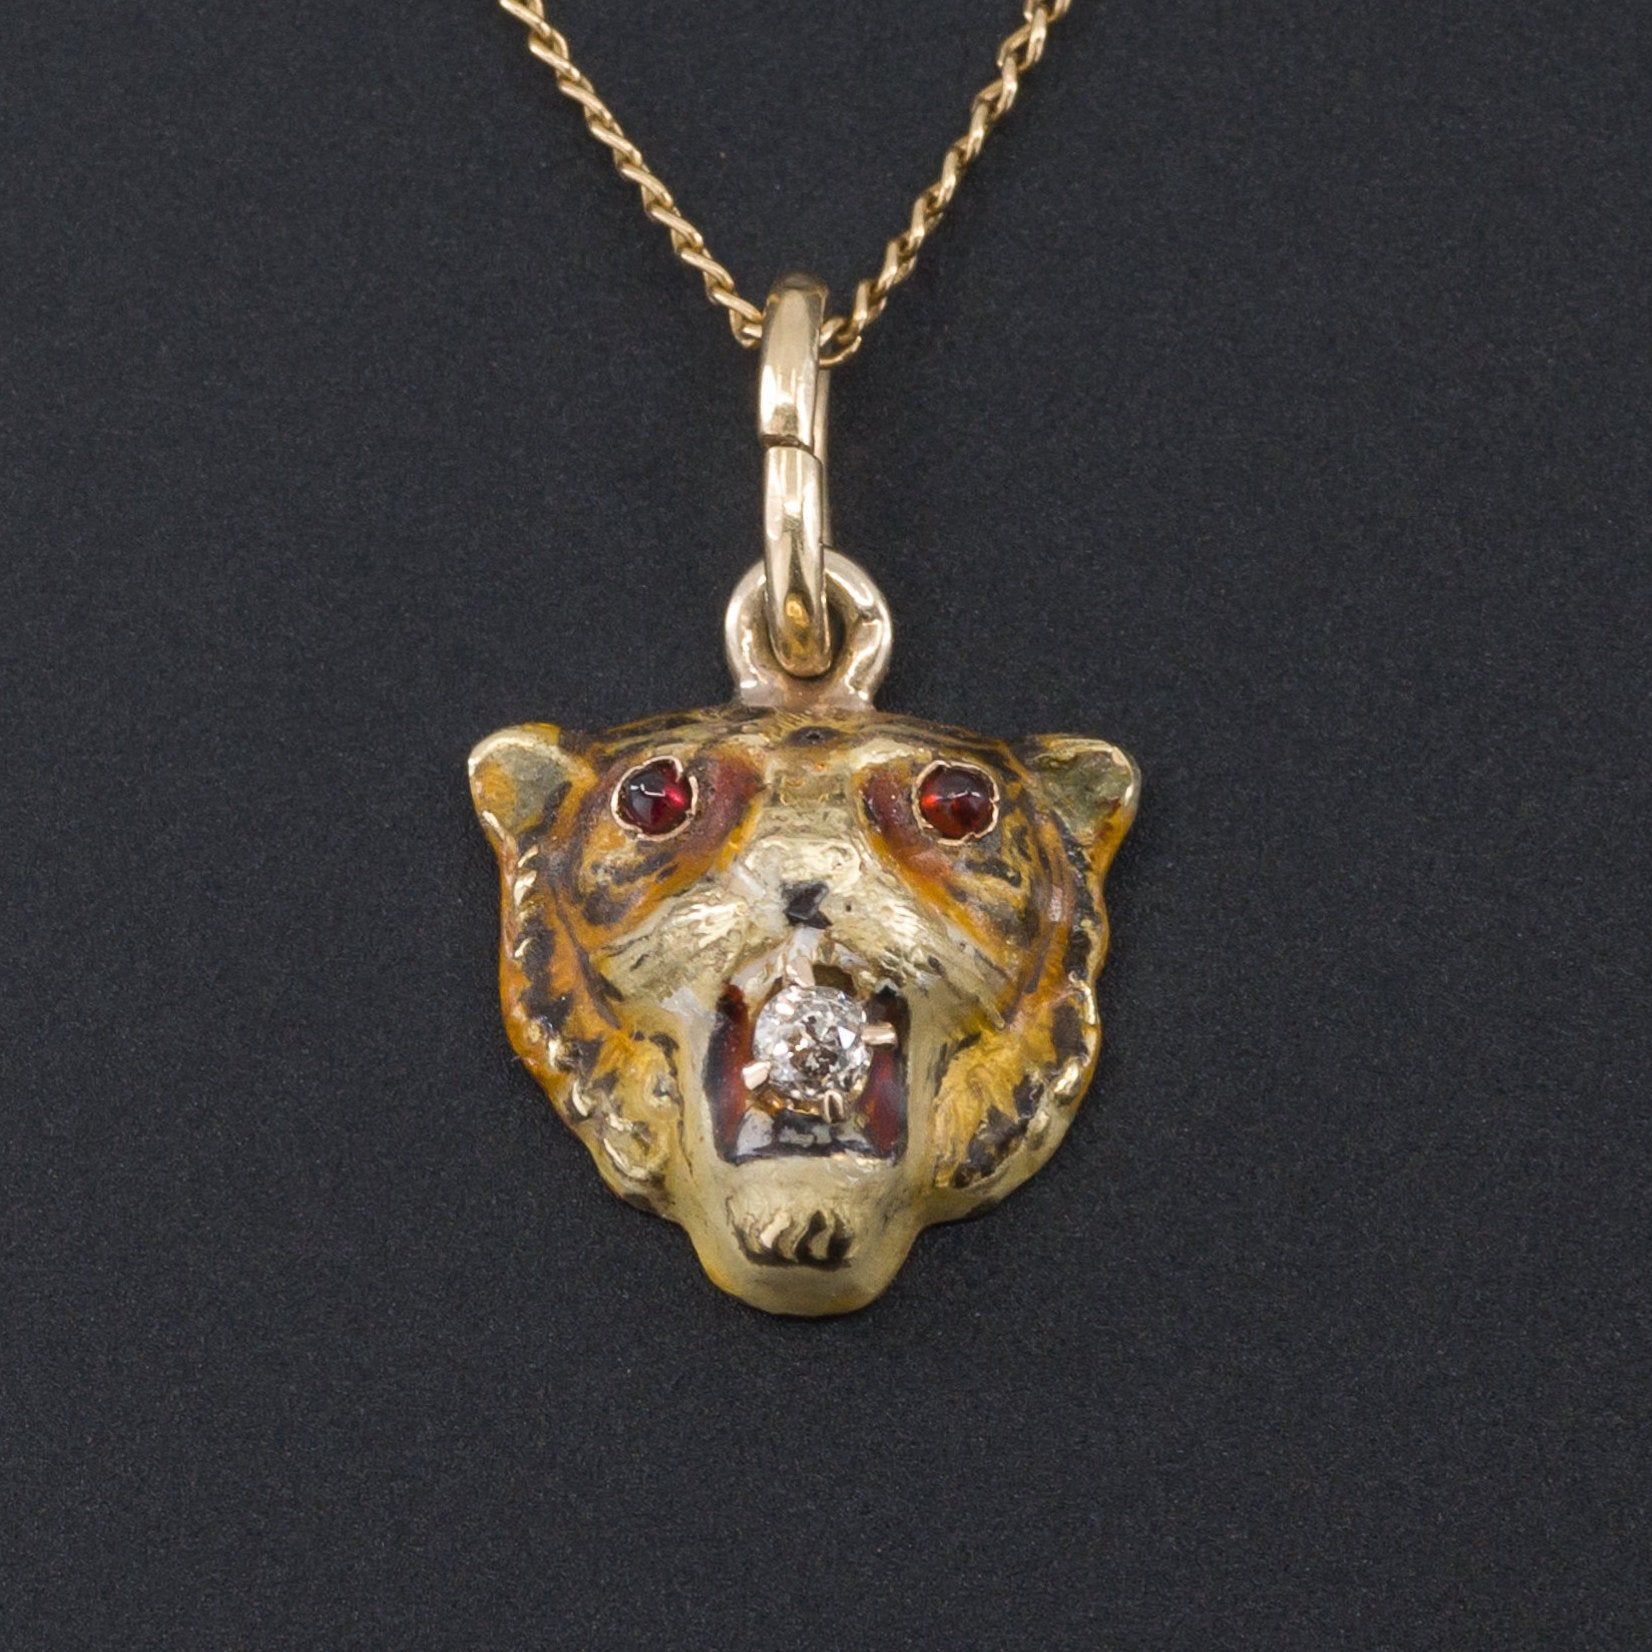 Antique Tiger Pendant Necklace | 10k Gold Tiger Pendant with Optional 14k Chain-Trademark Antiques